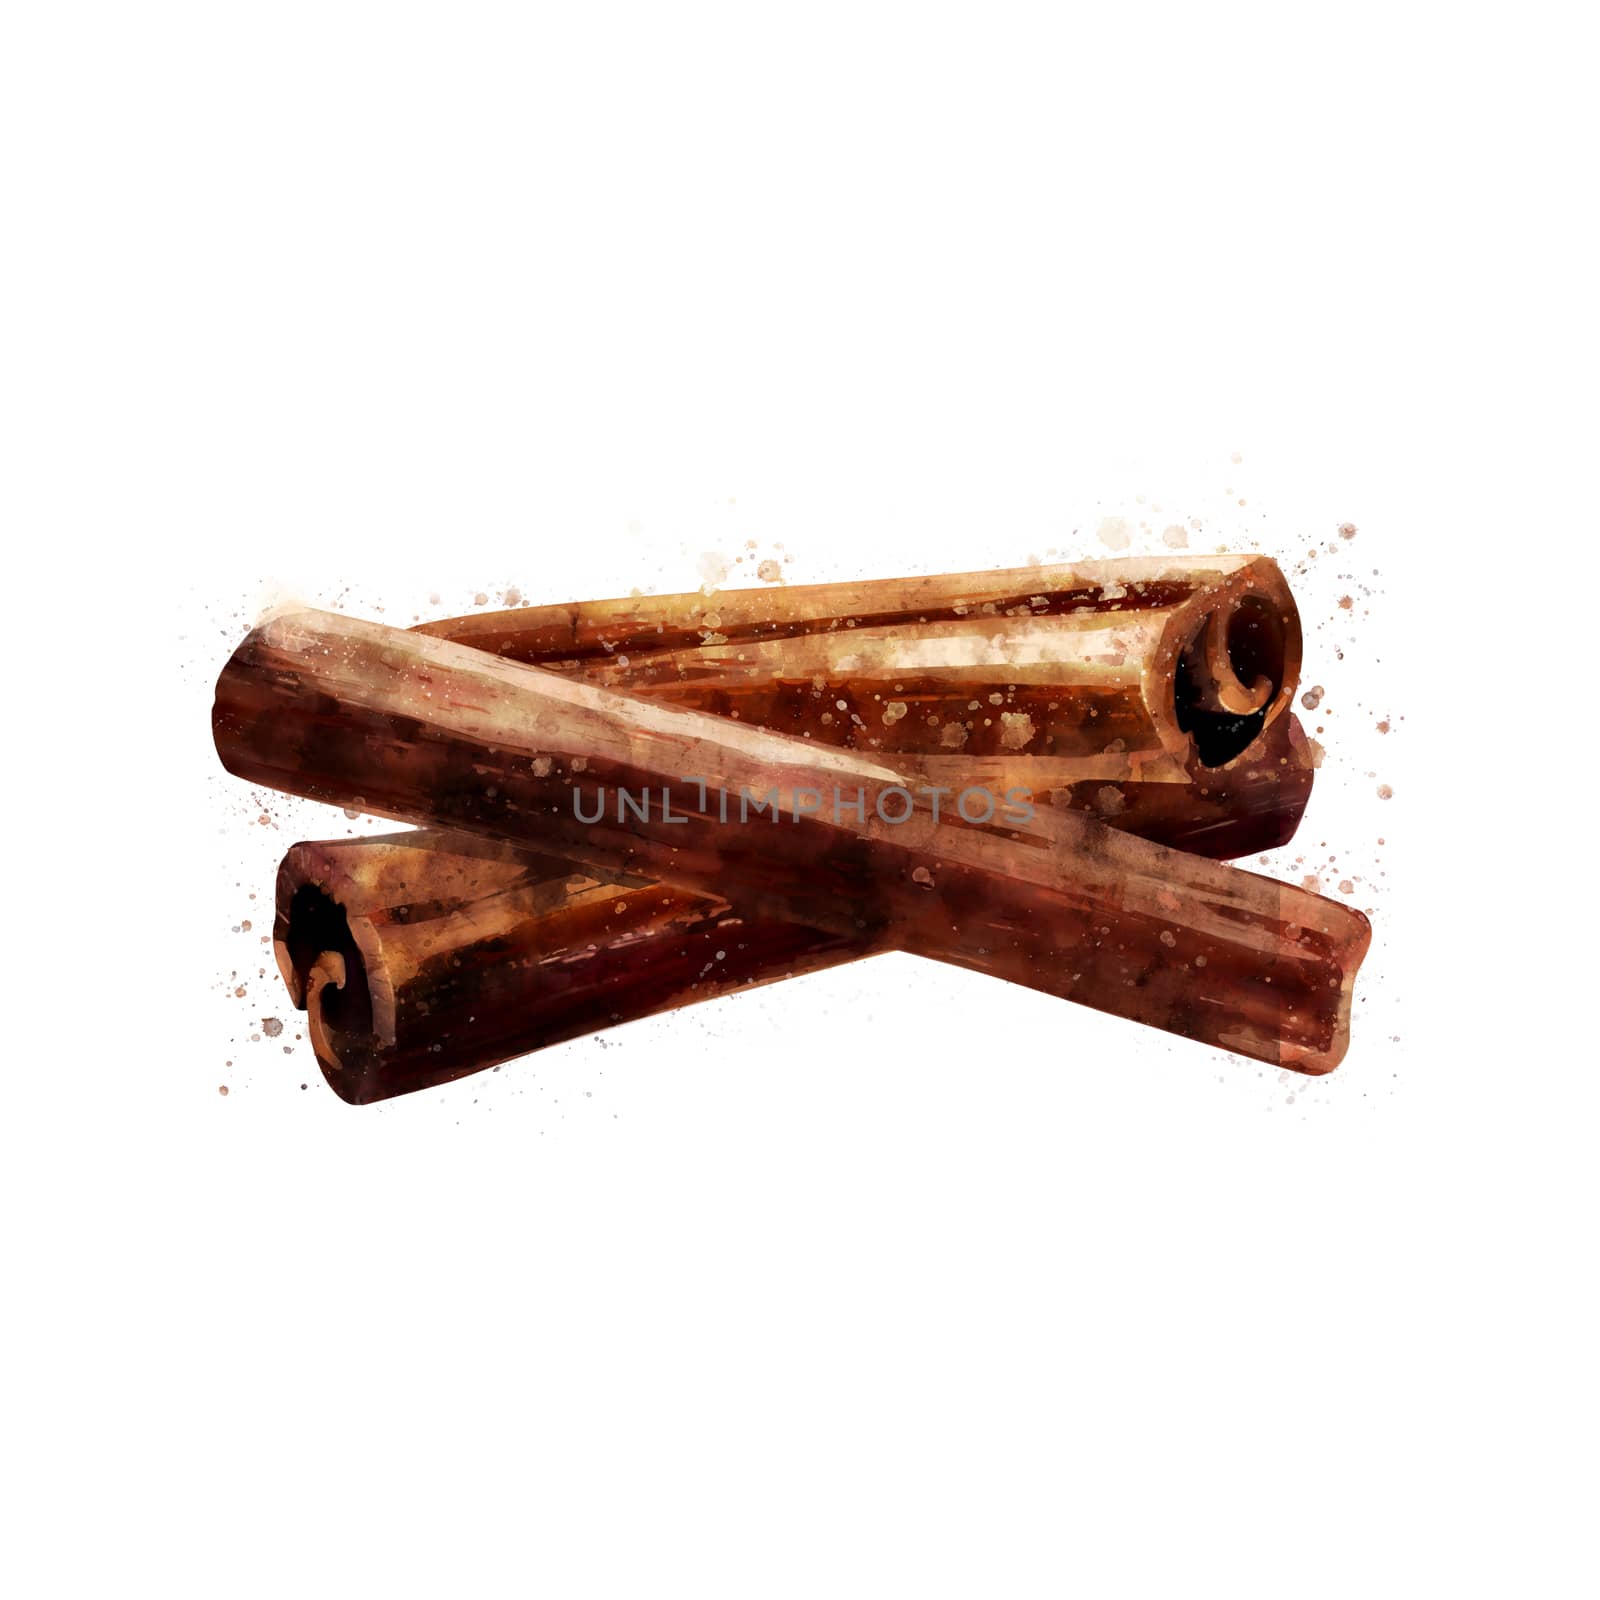 Cinnamon, isolated hand-painted illustration on a white background